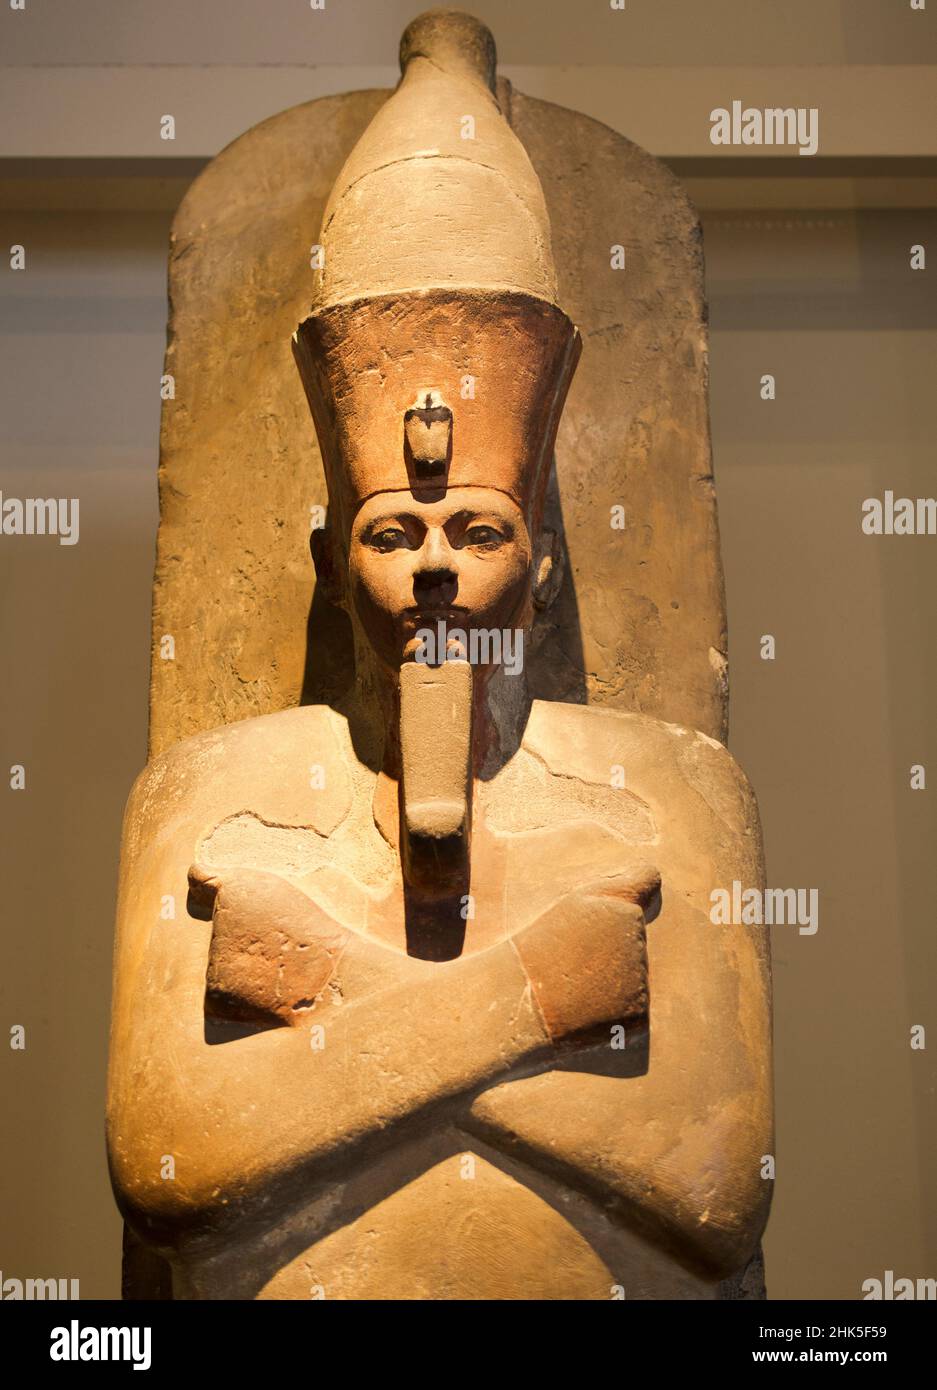 Amenhotep I was the second Pharaoh of the 18th Dynasty of Egypt, who reigned from roughly 1526 to 1506 BCE.   Established in 1753, the British Museum Stock Photo